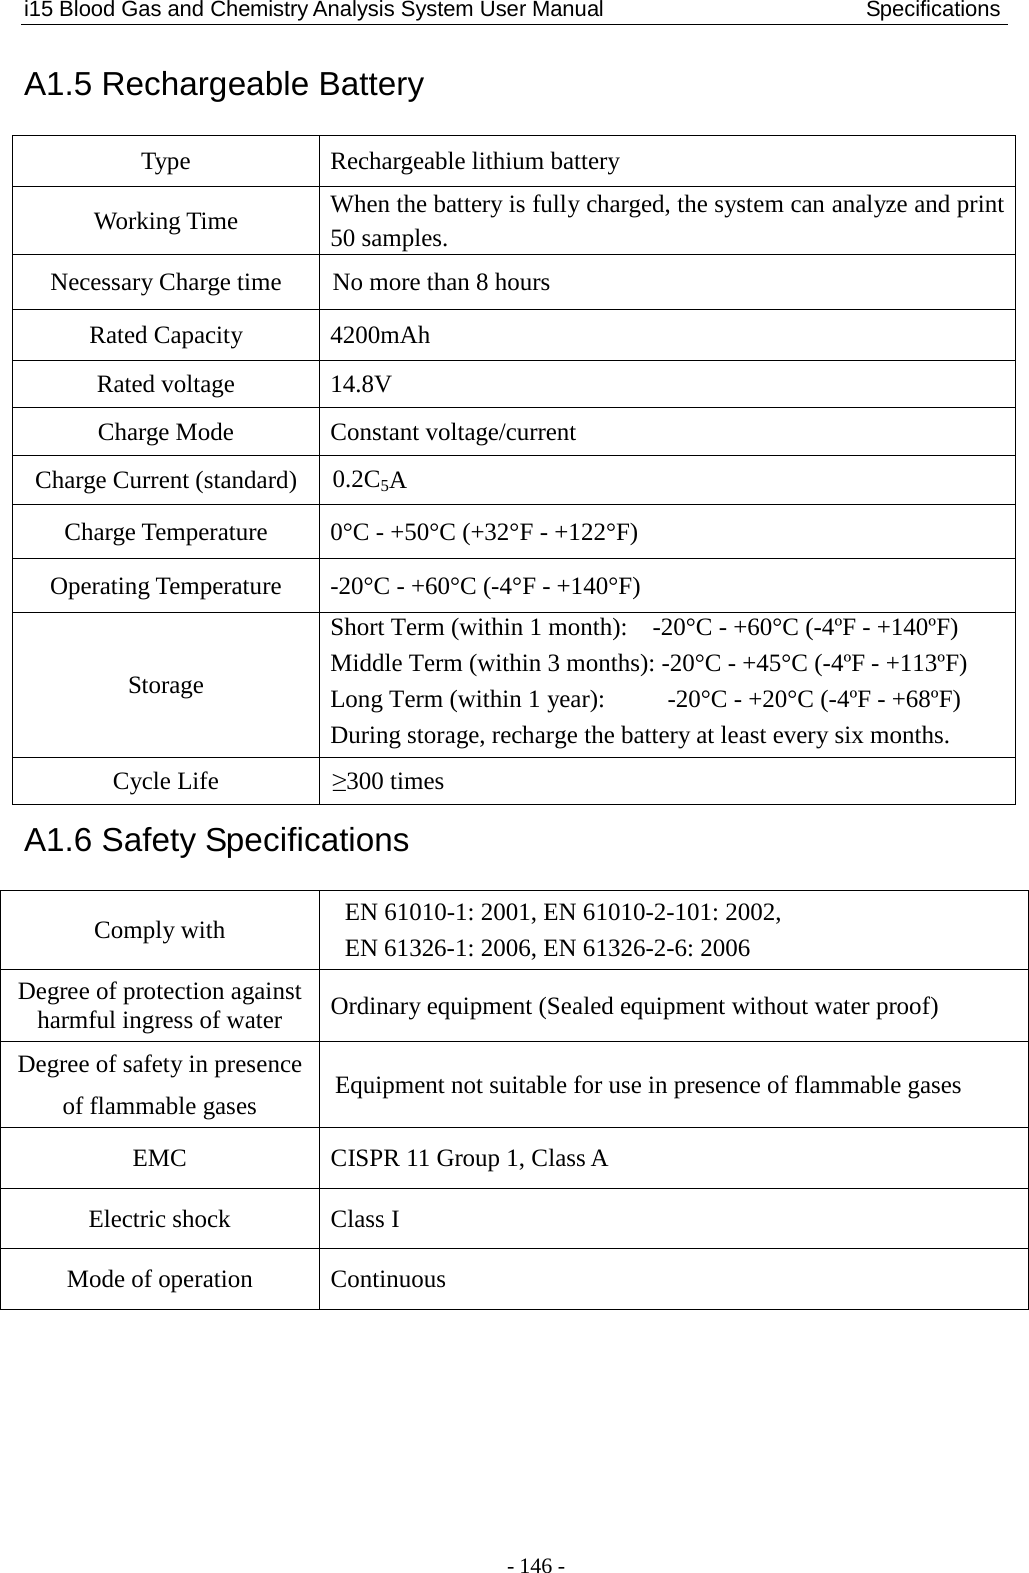 i15 Blood Gas and Chemistry Analysis System User Manual                         Specifications - 146 - A1.5 Rechargeable Battery Type Rechargeable lithium battery Working Time When the battery is fully charged, the system can analyze and print 50 samples. Necessary Charge time No more than 8 hours Rated Capacity  4200mAh Rated voltage  14.8V Charge Mode  Constant voltage/current Charge Current (standard)  0.2C5A Charge Temperature  0°C - +50°C (+32°F - +122°F) Operating Temperature  -20°C - +60°C (-4°F - +140°F) Storage Short Term (within 1 month):    -20°C - +60°C (-4ºF - +140ºF) Middle Term (within 3 months): -20°C - +45°C (-4ºF - +113ºF) Long Term (within 1 year):       -20°C - +20°C (-4ºF - +68ºF) During storage, recharge the battery at least every six months. Cycle Life ≥300 times A1.6 Safety Specifications Comply with EN 61010-1: 2001, EN 61010-2-101: 2002, EN 61326-1: 2006, EN 61326-2-6: 2006 Degree of protection against harmful ingress of water  Ordinary equipment (Sealed equipment without water proof) Degree of safety in presence of flammable gases Equipment not suitable for use in presence of flammable gases EMC CISPR 11 Group 1, Class A Electric shock Class I Mode of operation Continuous 